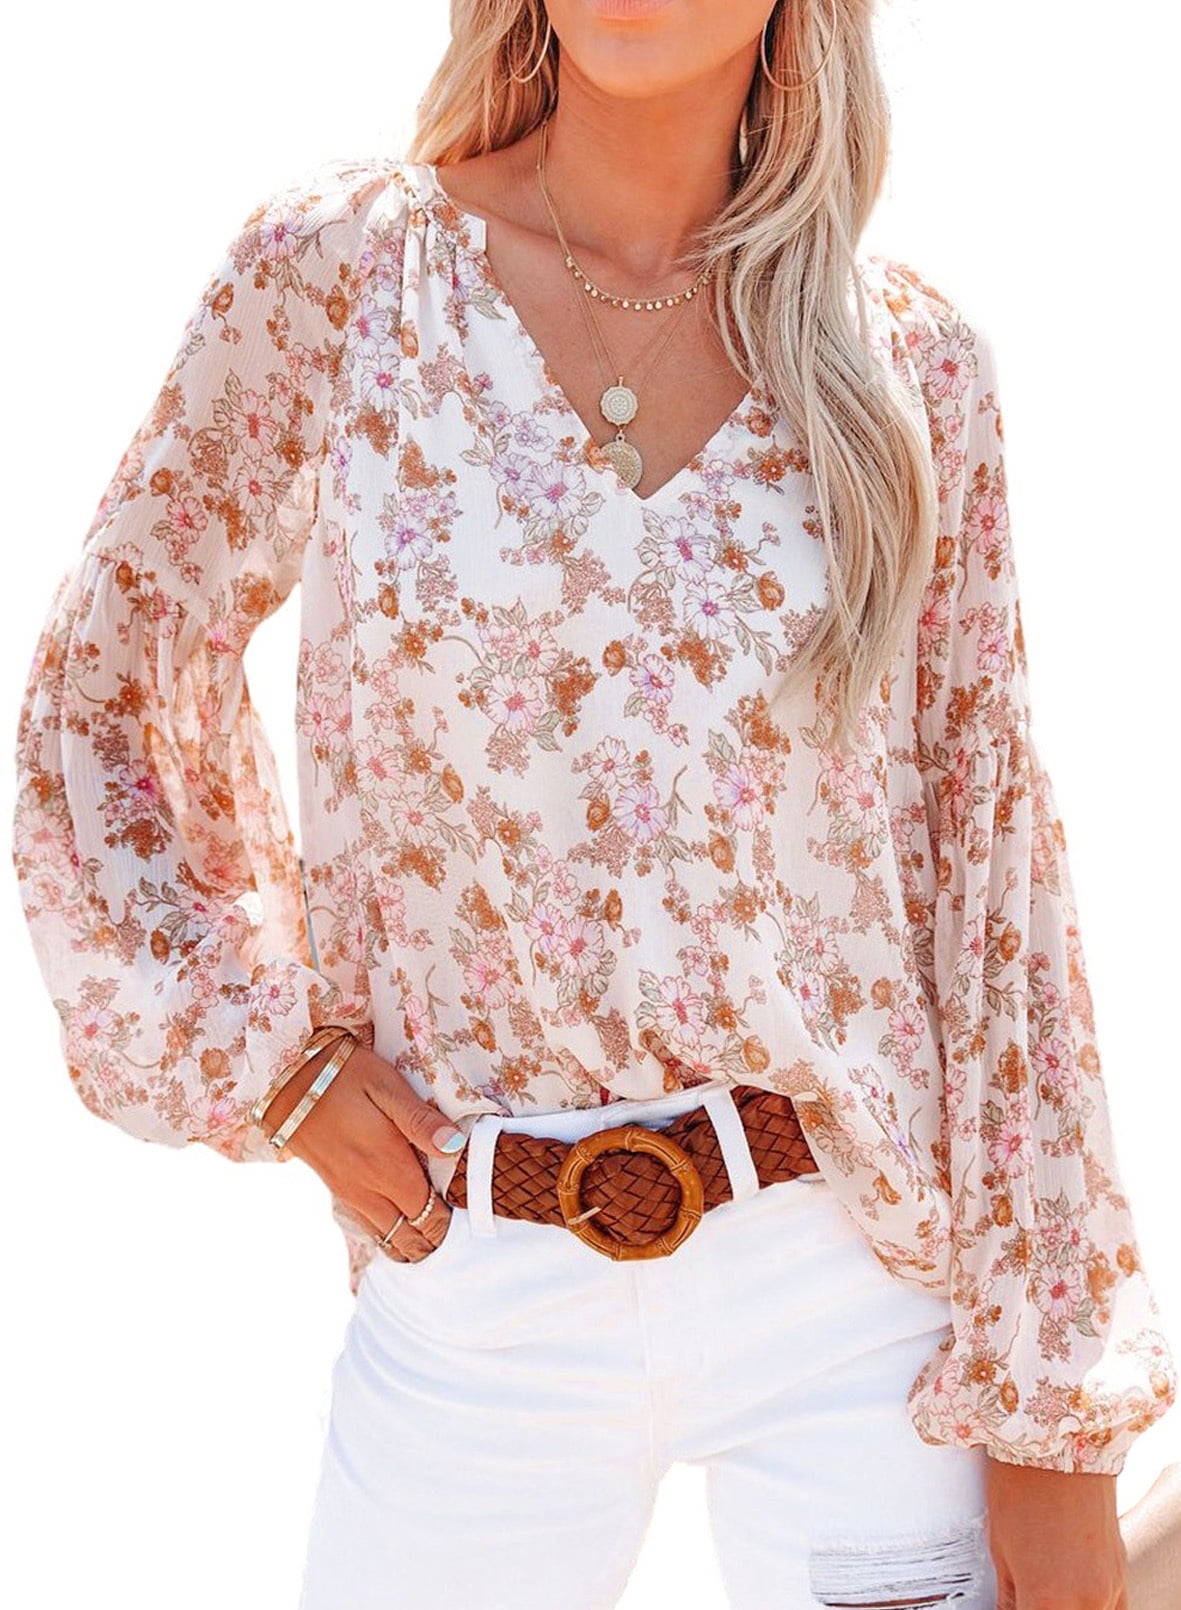 Astylish Floral Blouses for Women V Neck Spring Shirts Boho Print Summer  Tops Elastic Cuffs Long Sleeve Spring Shirt Size M